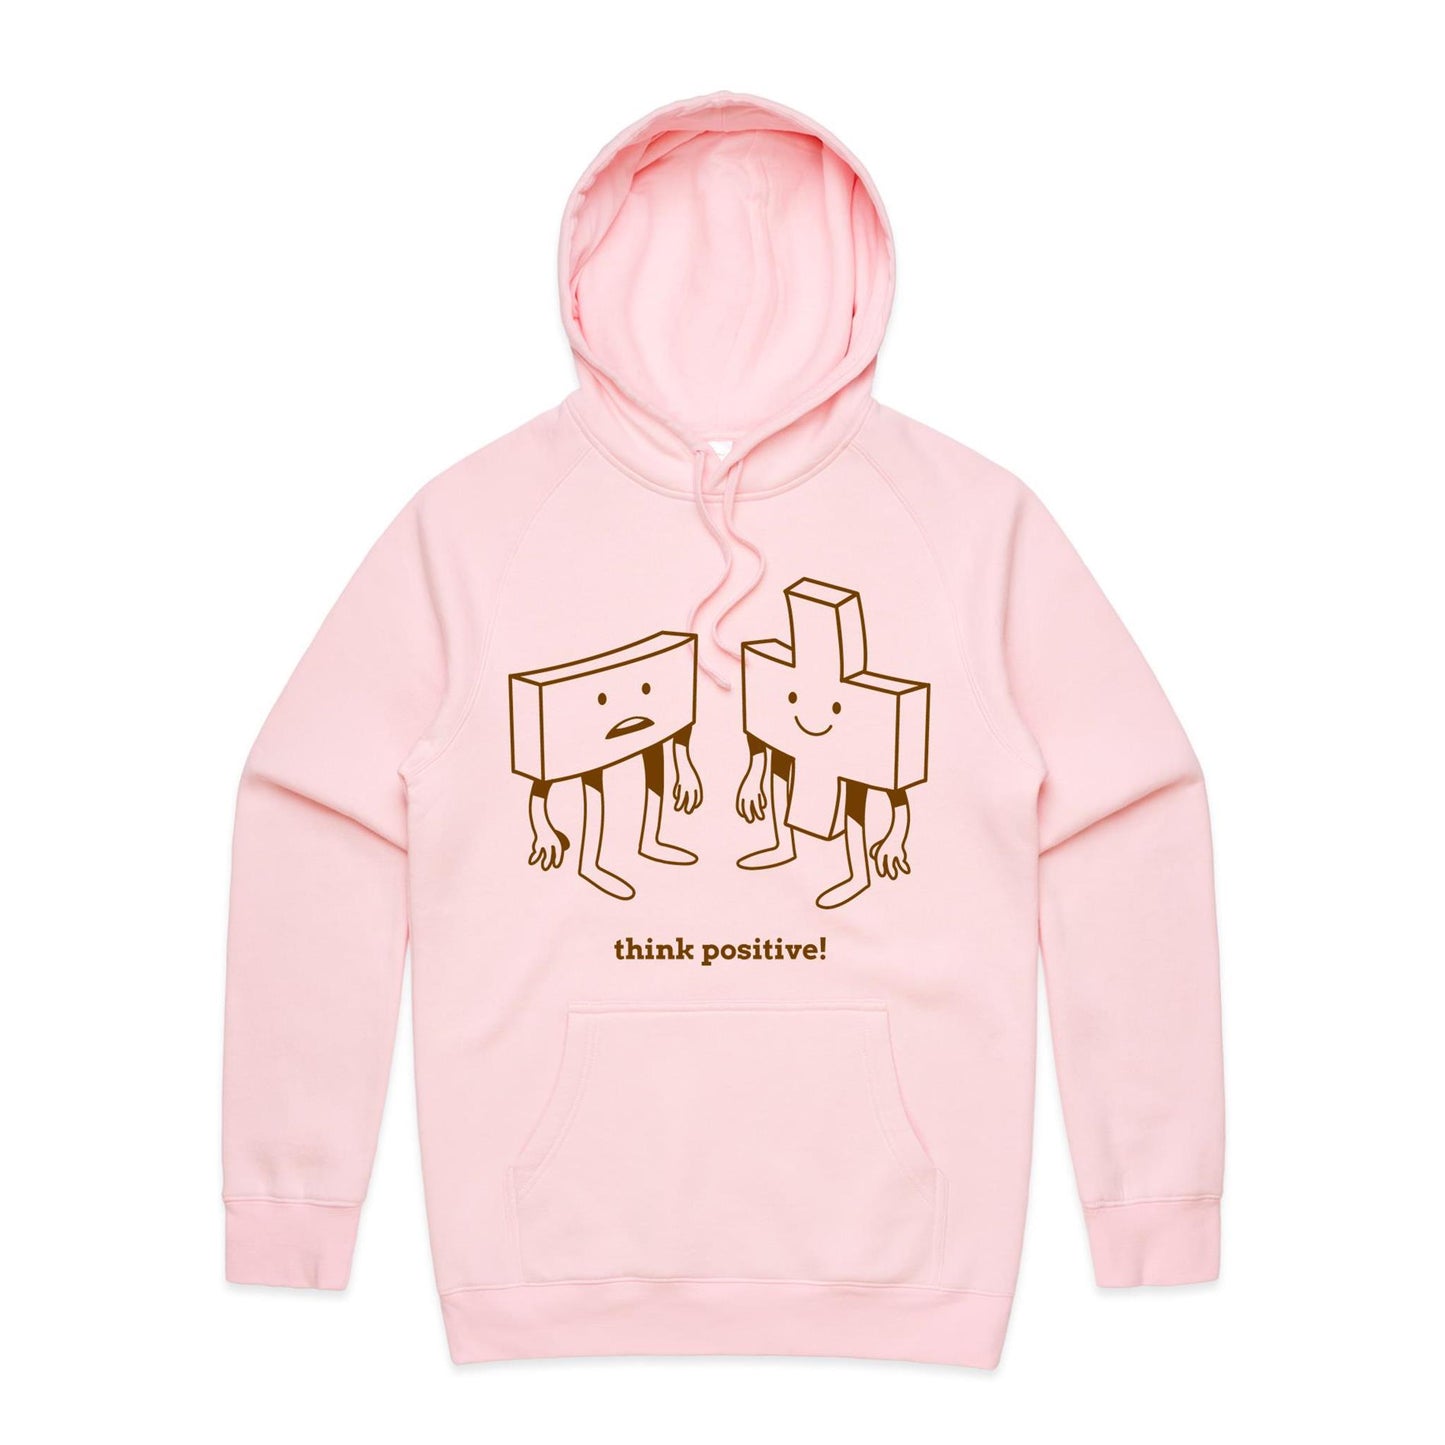 Think Positive, Plus And Minus - Supply Hood Pink Mens Supply Hoodie Maths Motivation